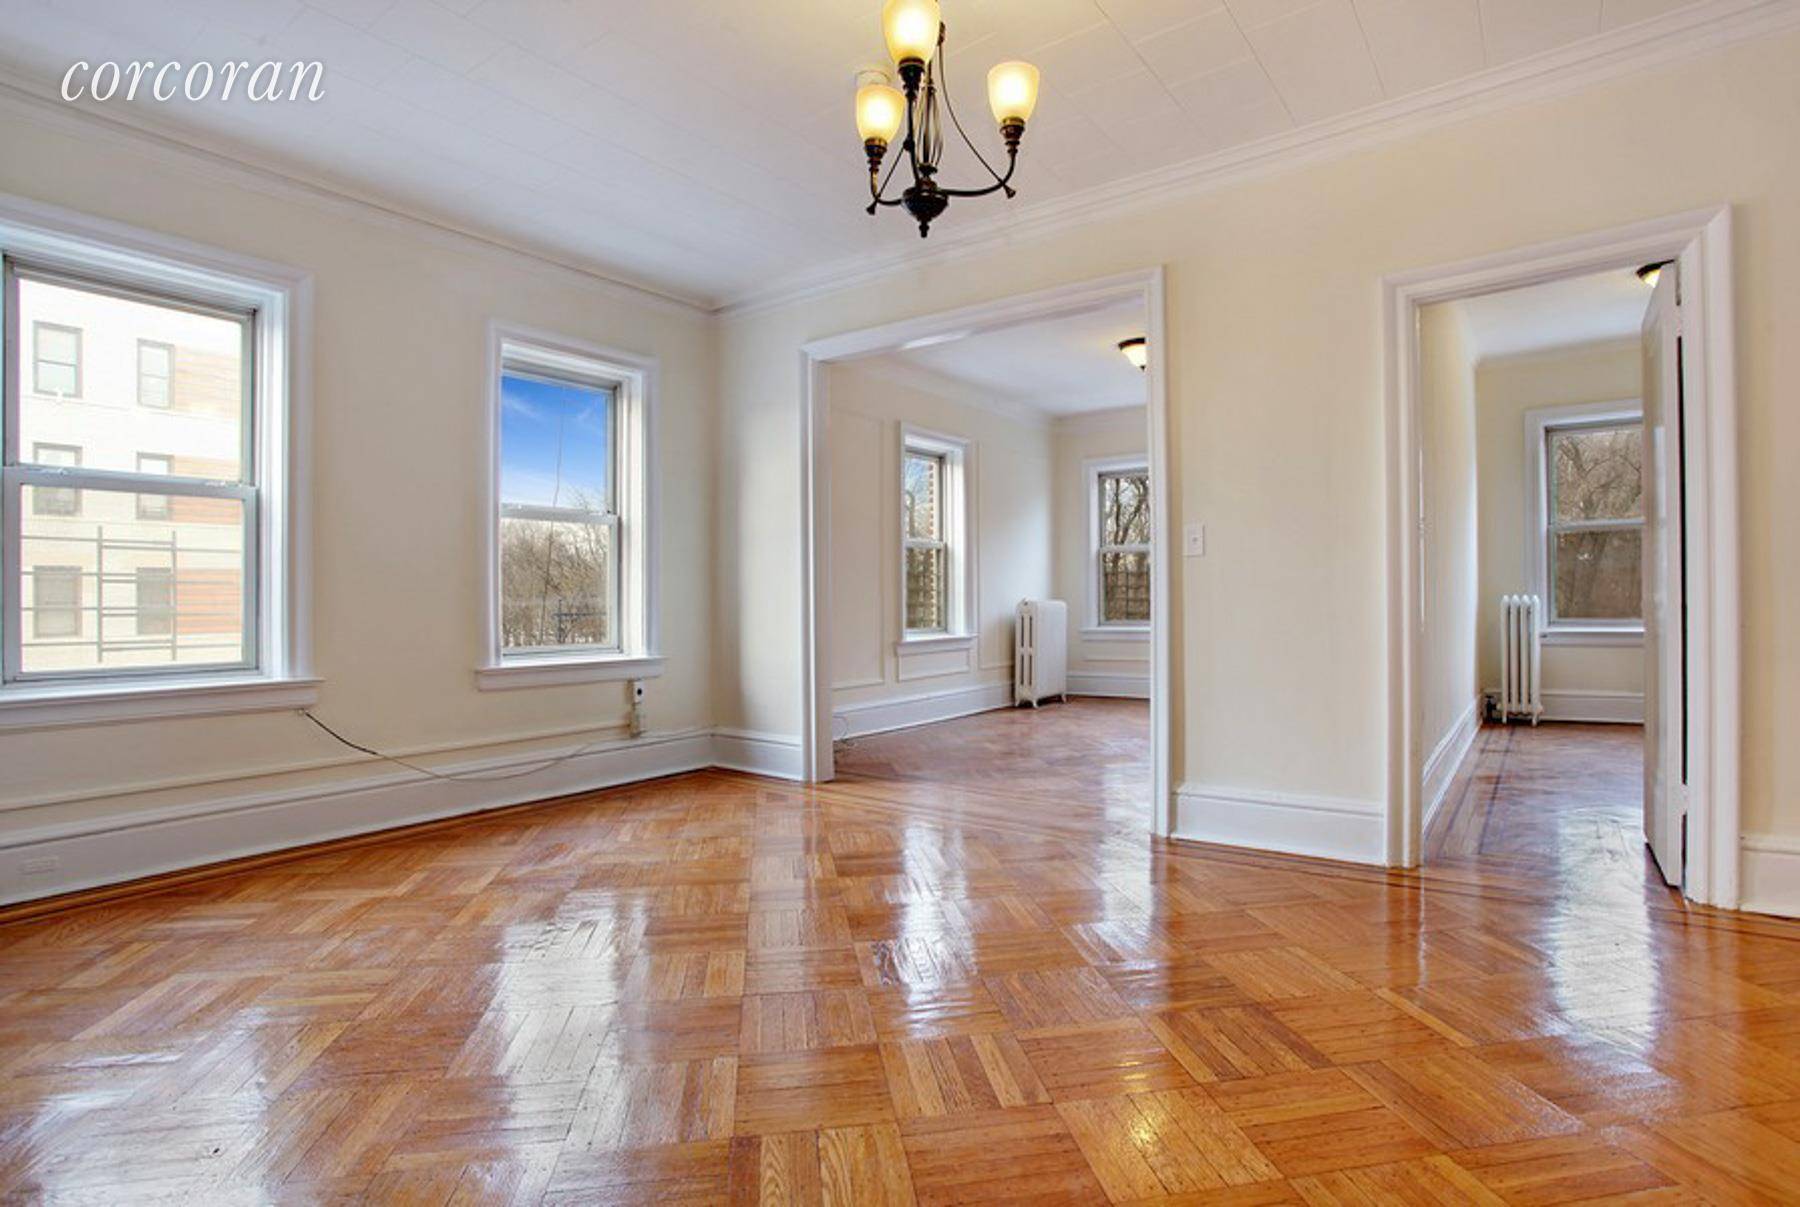 Live on the park ! Spacious and bright with over 1000 SF, this top floor apartment features 3 bedrooms, renovated kitchen and bath and has terrific views of Prospect Park ...